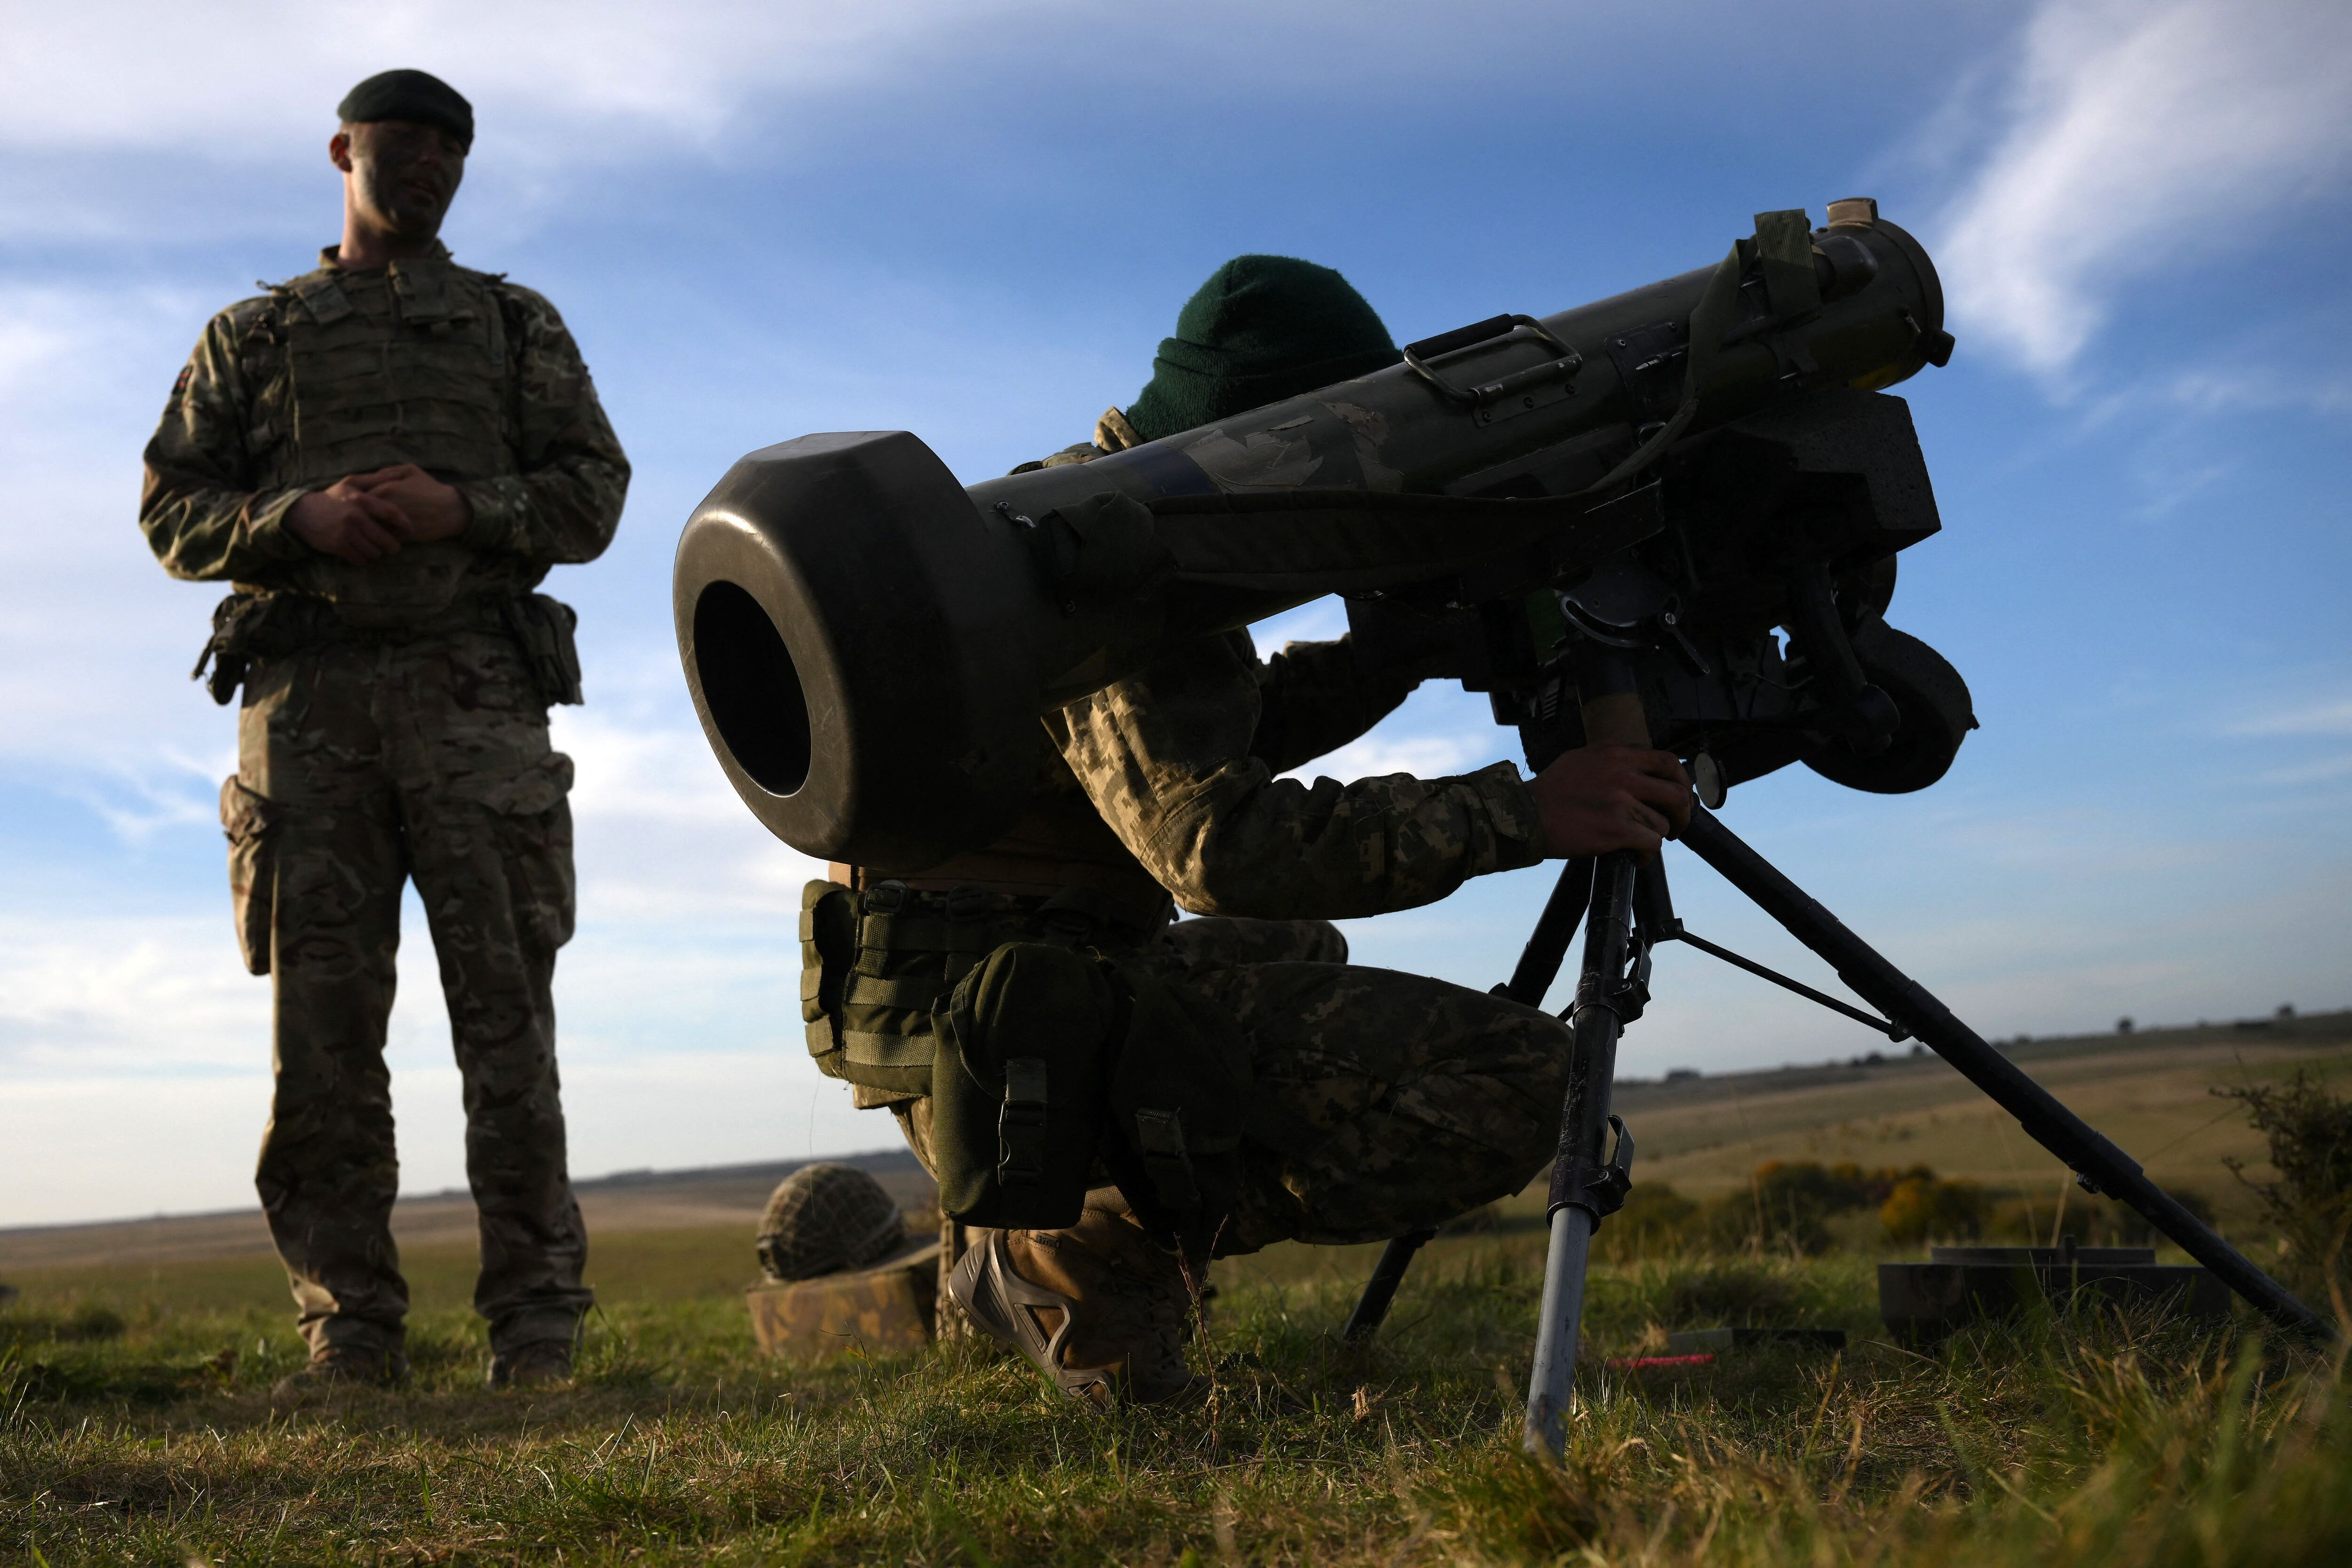 A Ukrainian recruit holds a Javelin anti-tank weapon during a five-week combat training course with the UK military, October 11, 2022. (Photo by Daniel LEAL/AFP).